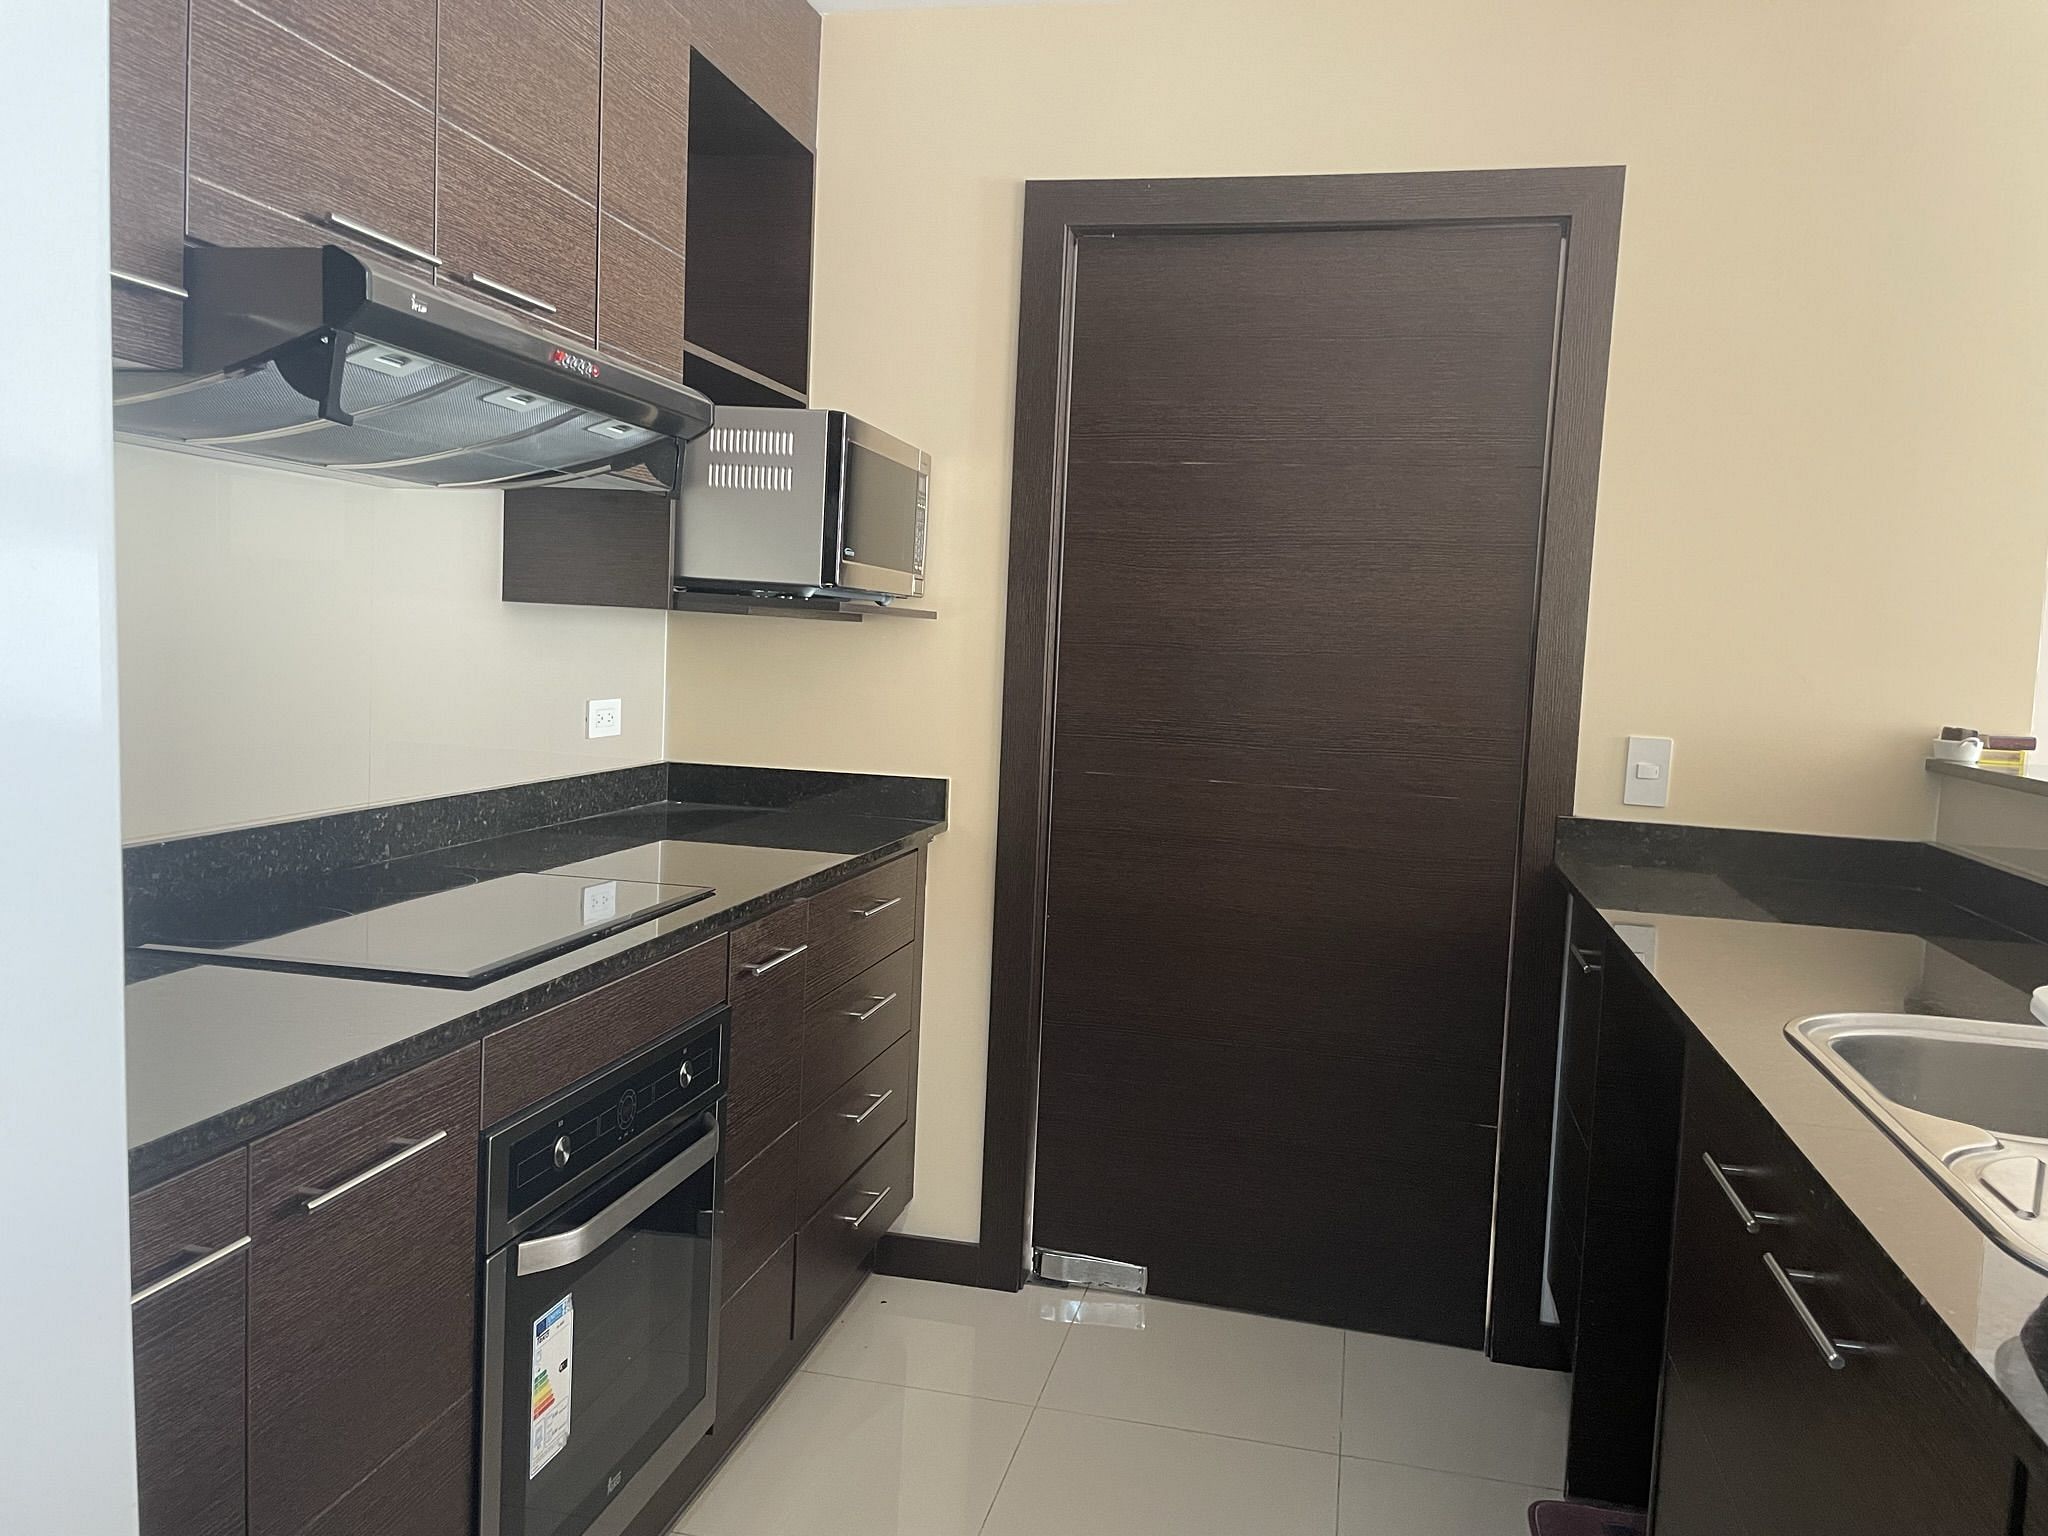 JWguest Apartment at Quito, Pichincha | Comfortable and complete department in Quito | Jwbnb no brobnb 6